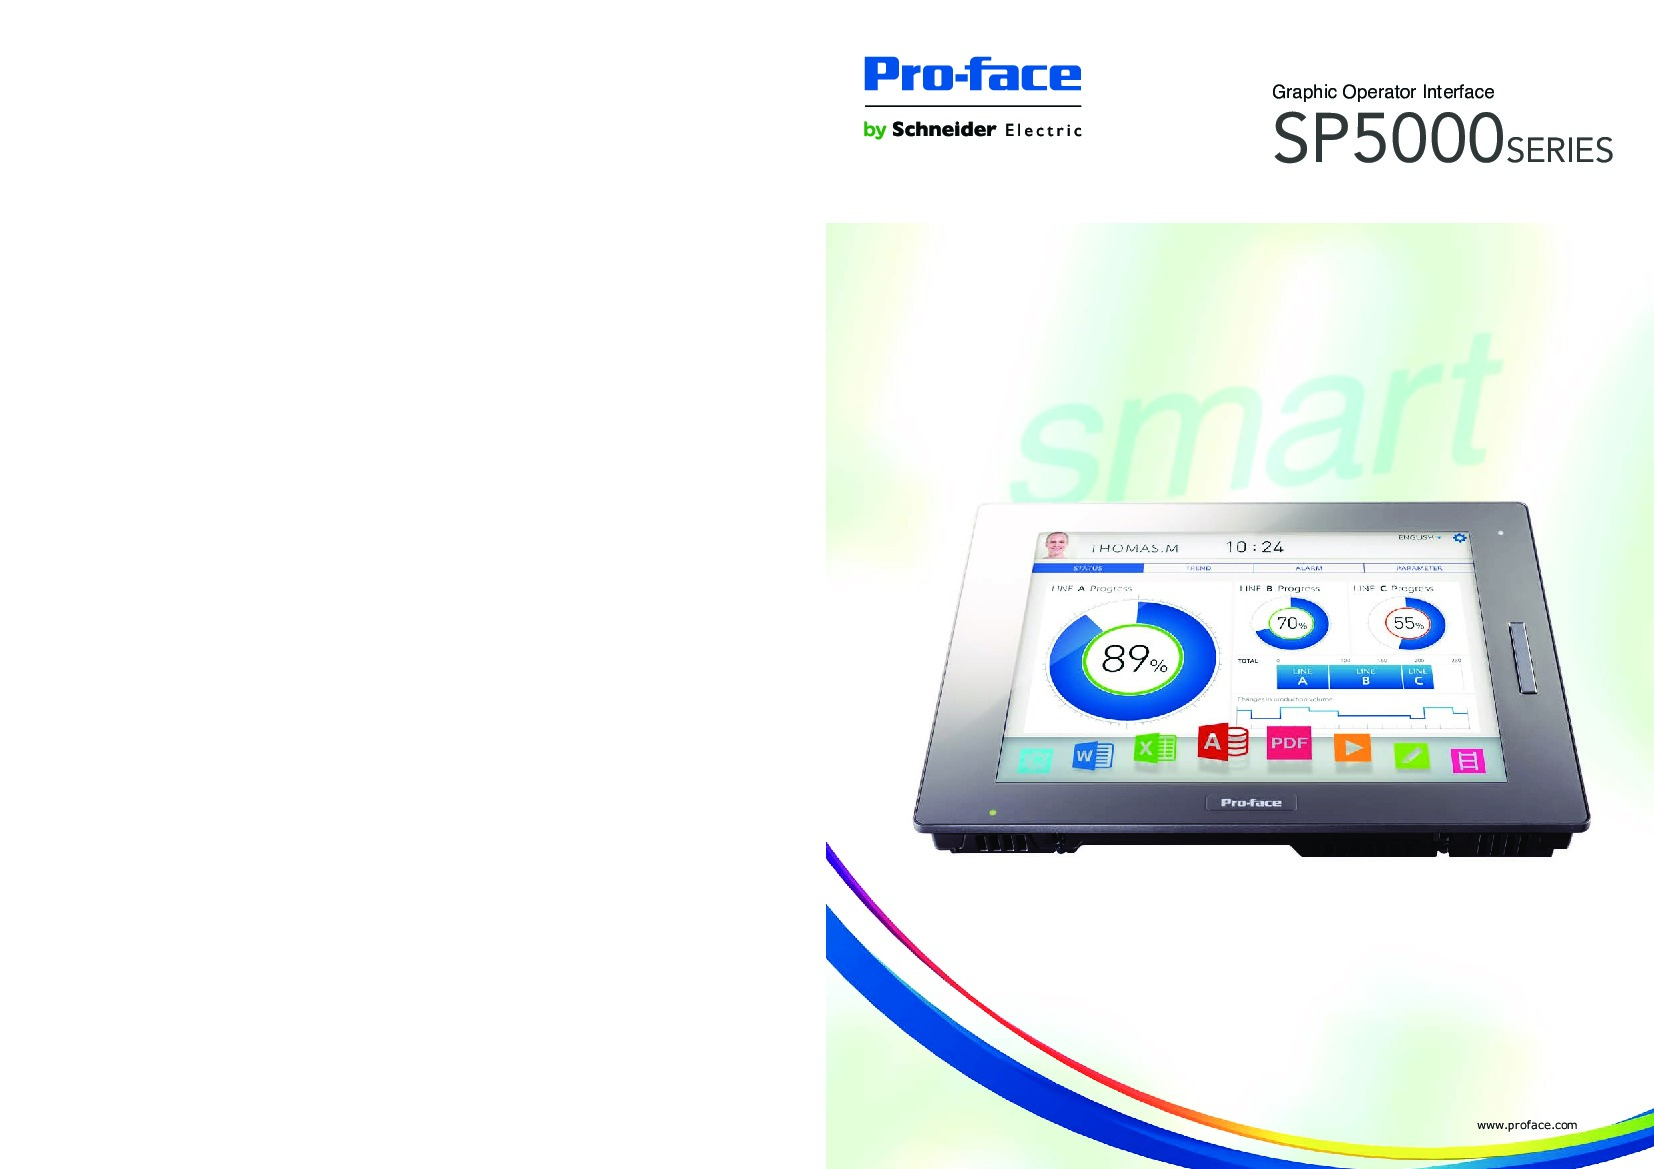 First Page Image of PFXSP5500TPD Pro-face SP5000 Catalog.pdf